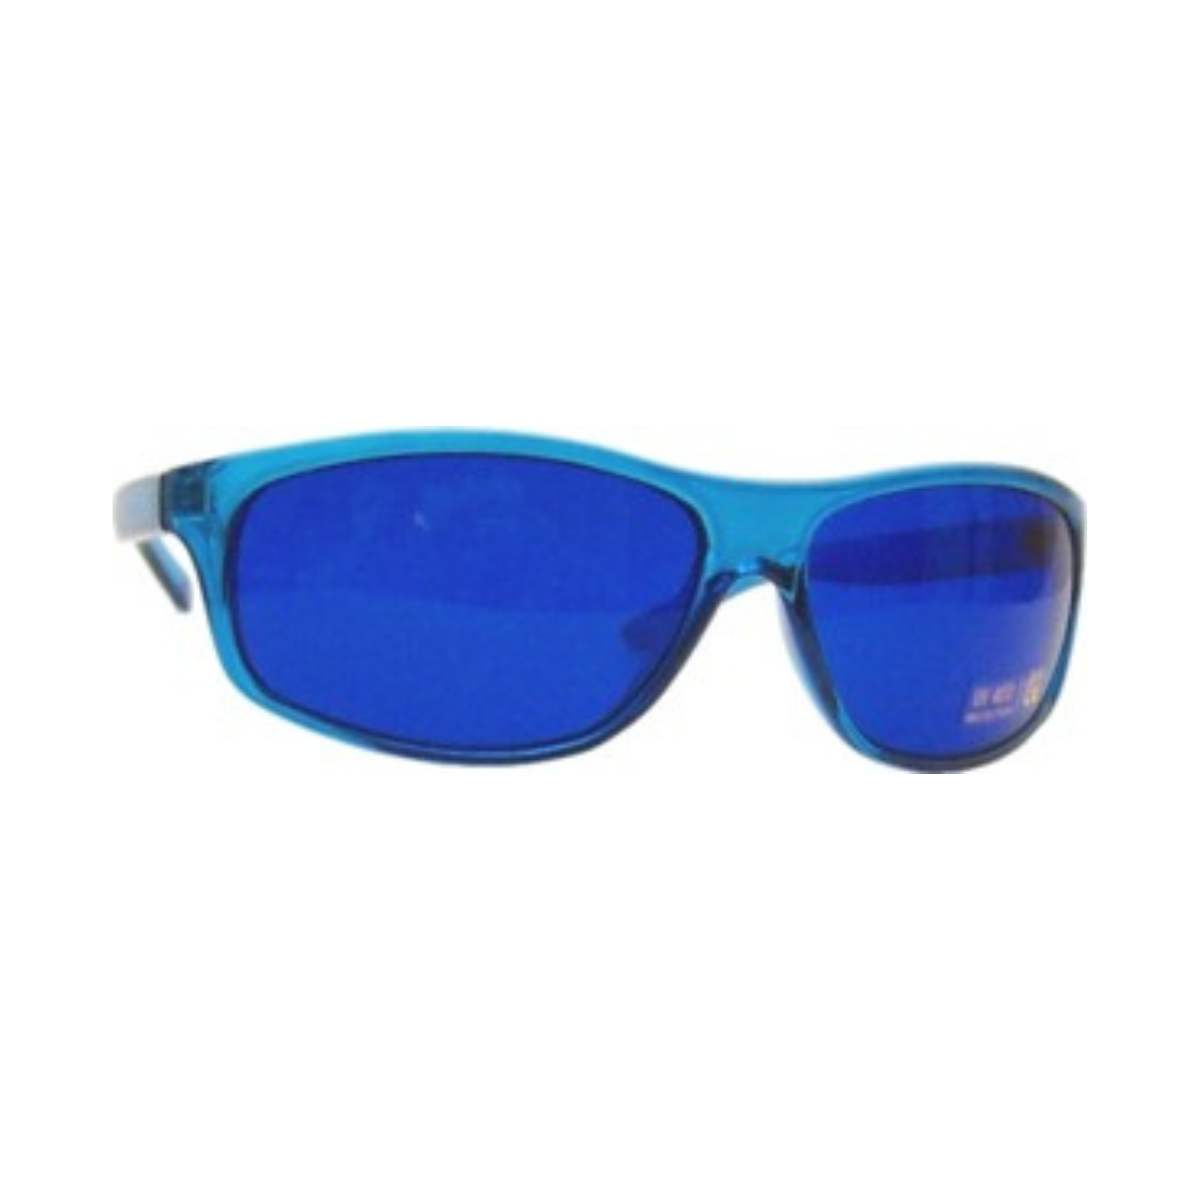 Colour Energy Therapy Glasses- Blue